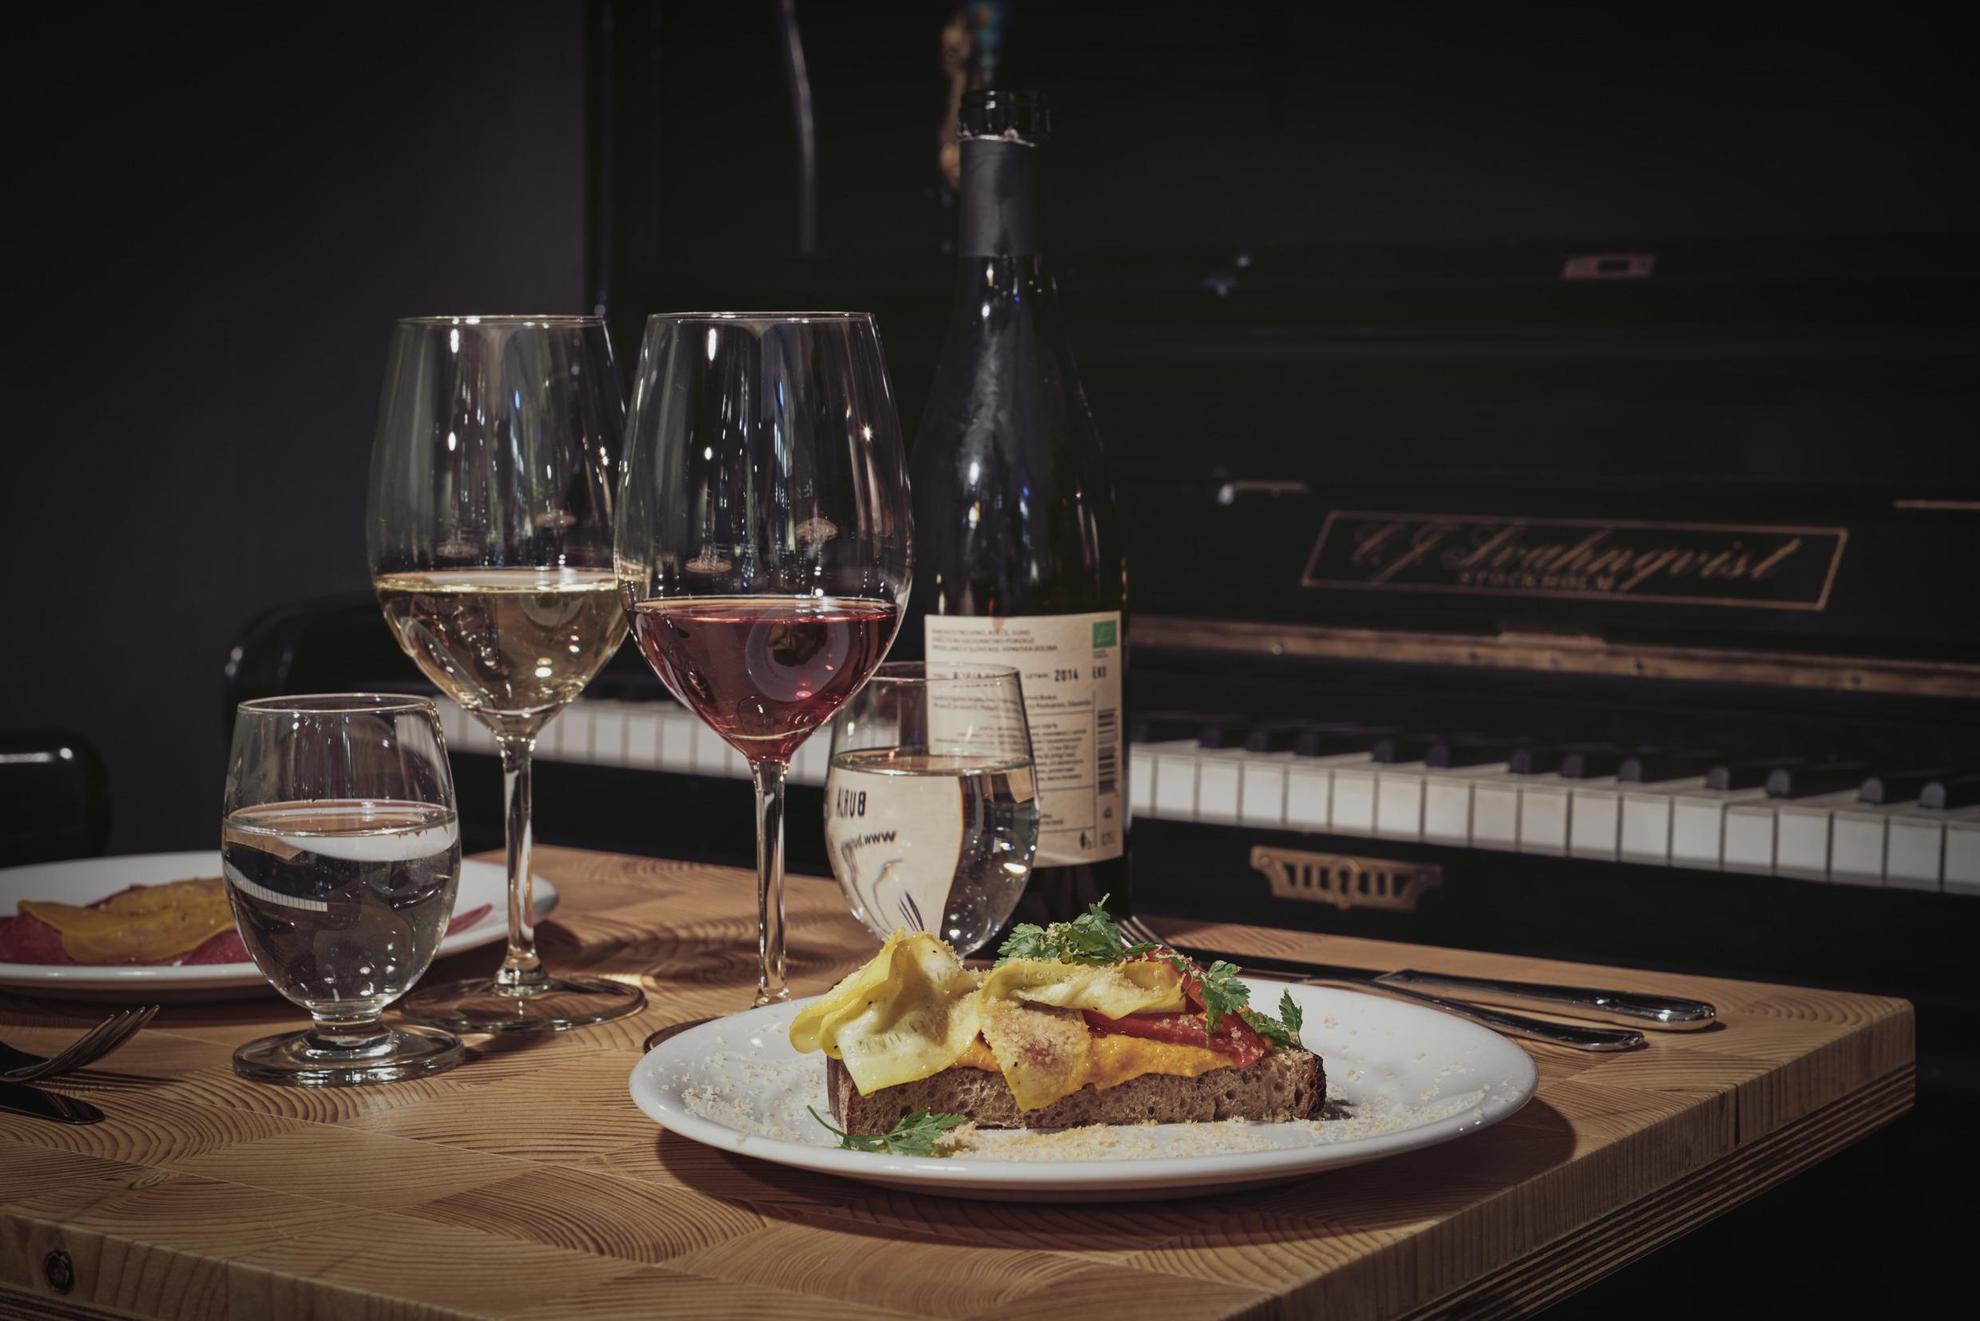 A table set with a wine bottle, two plates of food and two glasses of wine. The table is standing next to a piano.